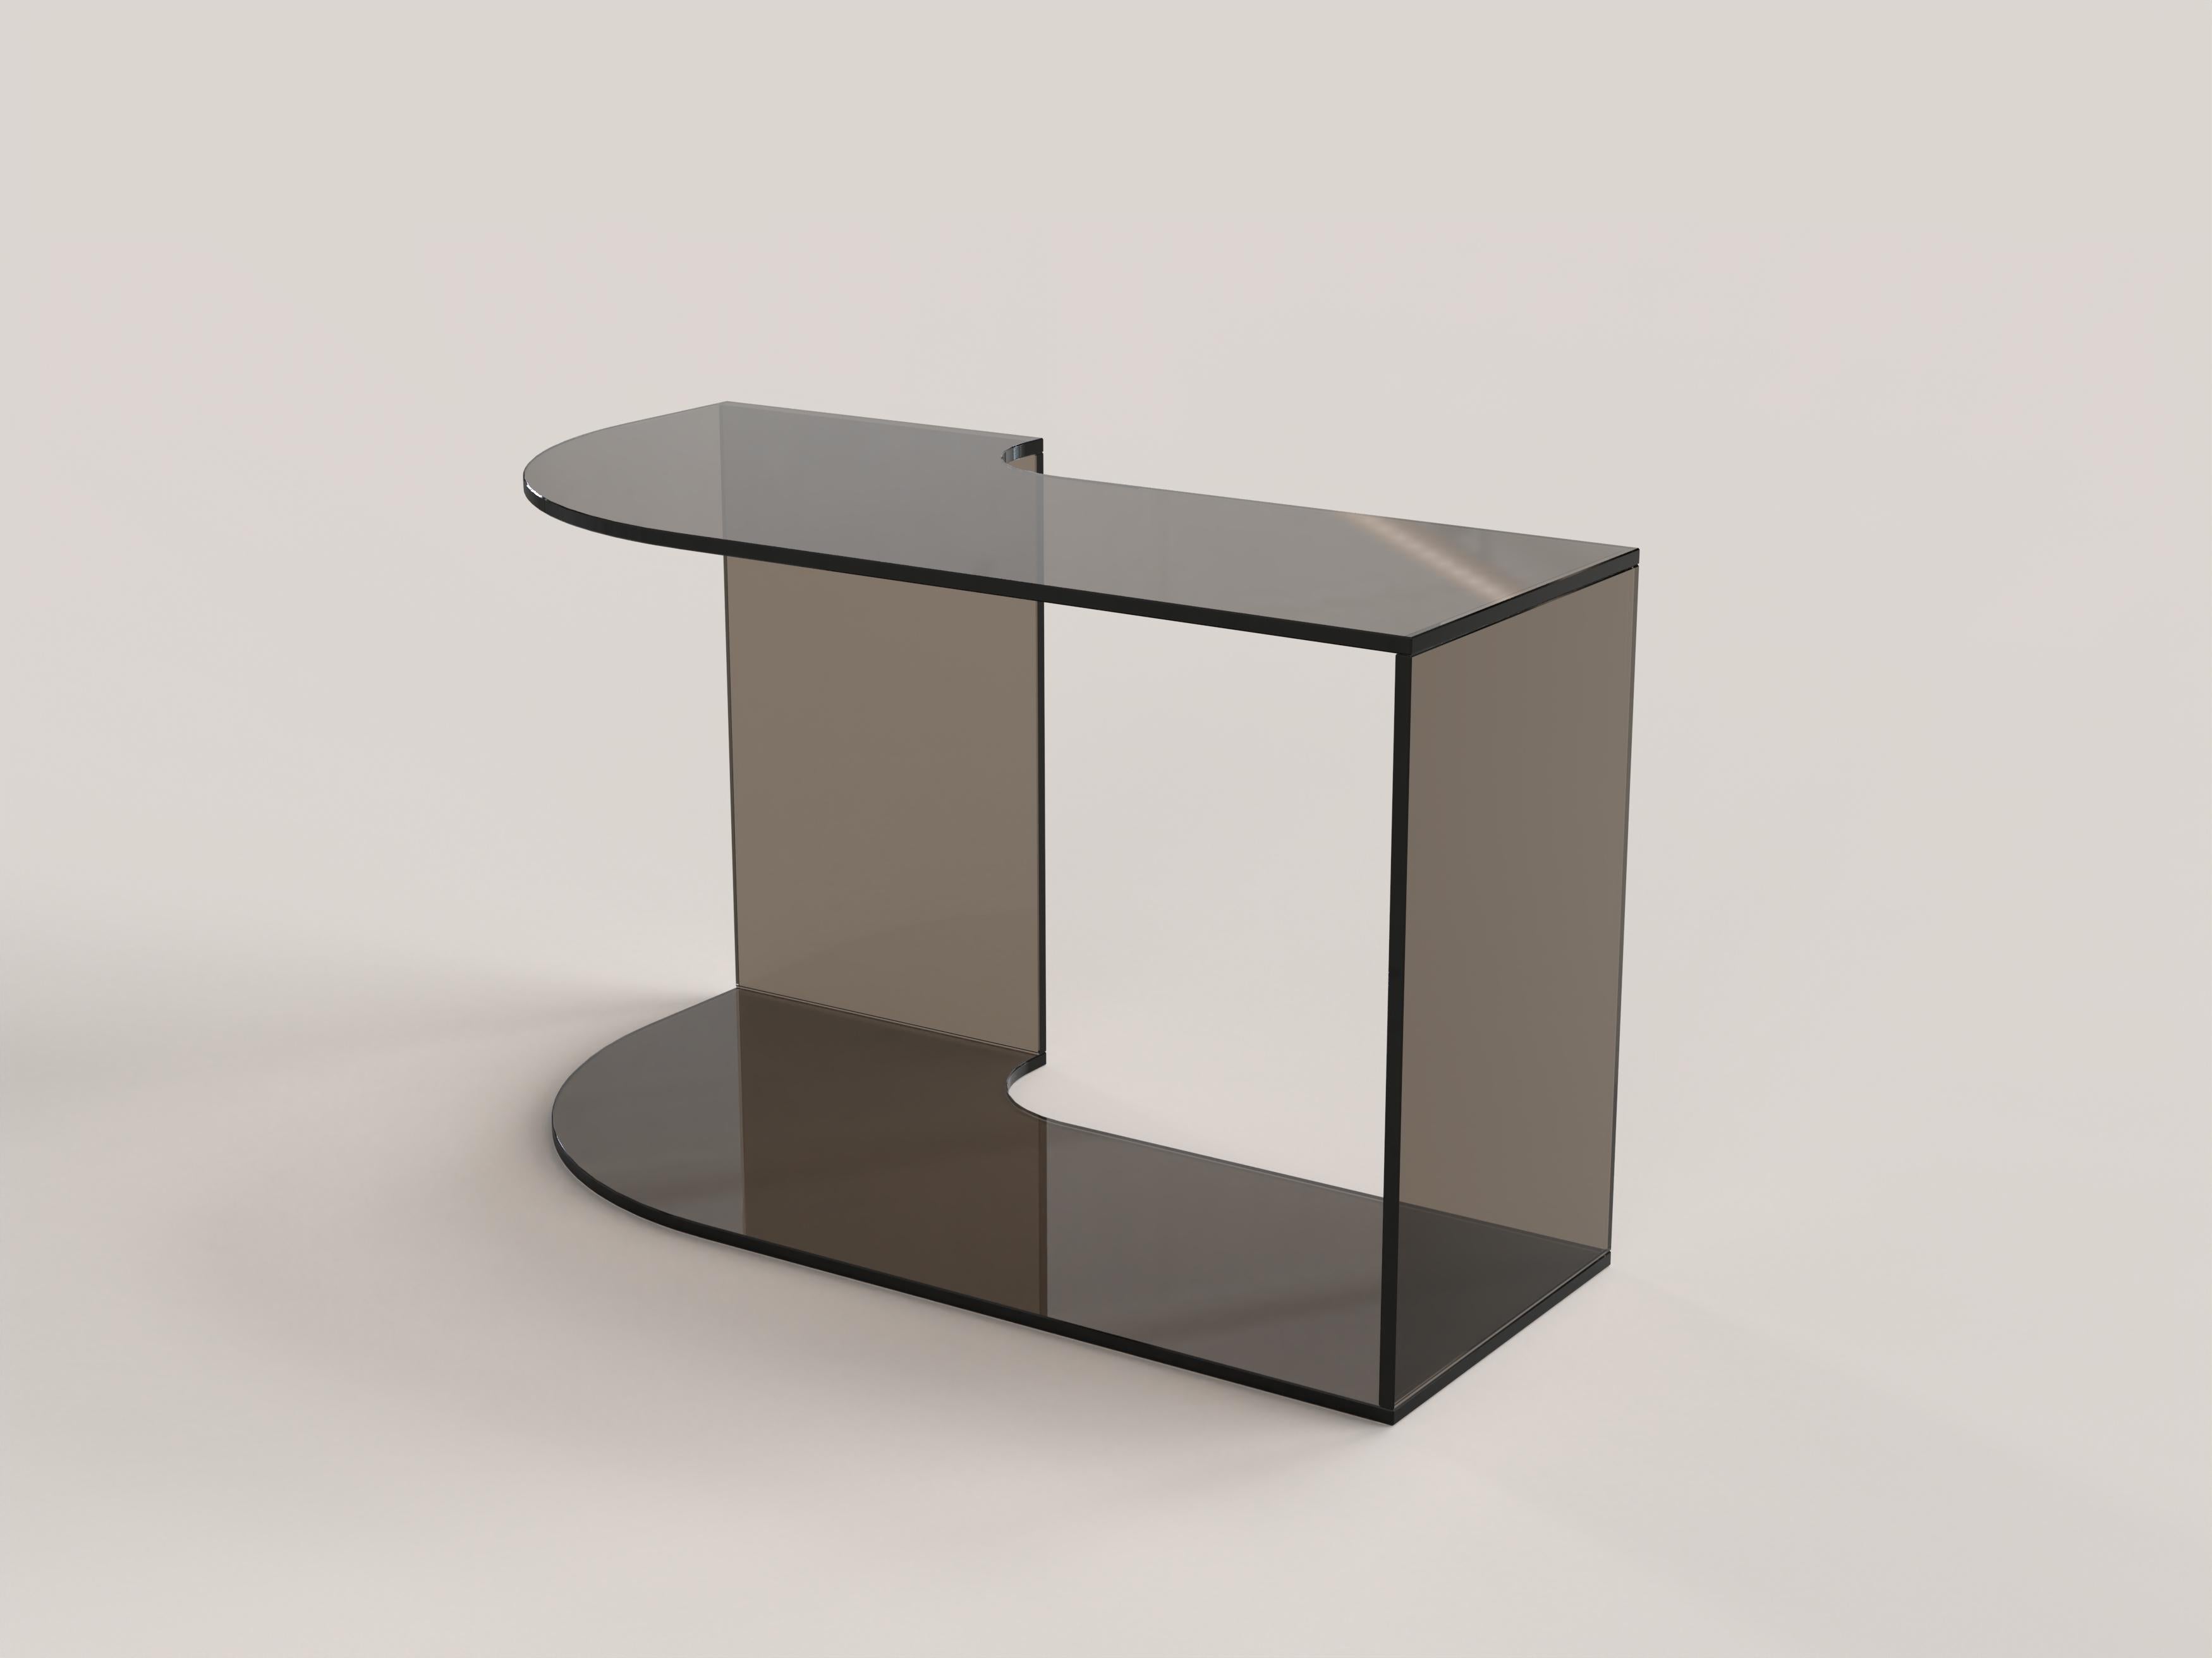 Quarter V2 Coffee Table by Edizione Limitata
Limited Edition of 1000 pieces. Signed and numbered.
Dimensions: D 70 x W 35 x H 41 cm.
Materials: Bronzed tempered glass.

Quarter is a collection of contemporary side tables made by Italian artisans in